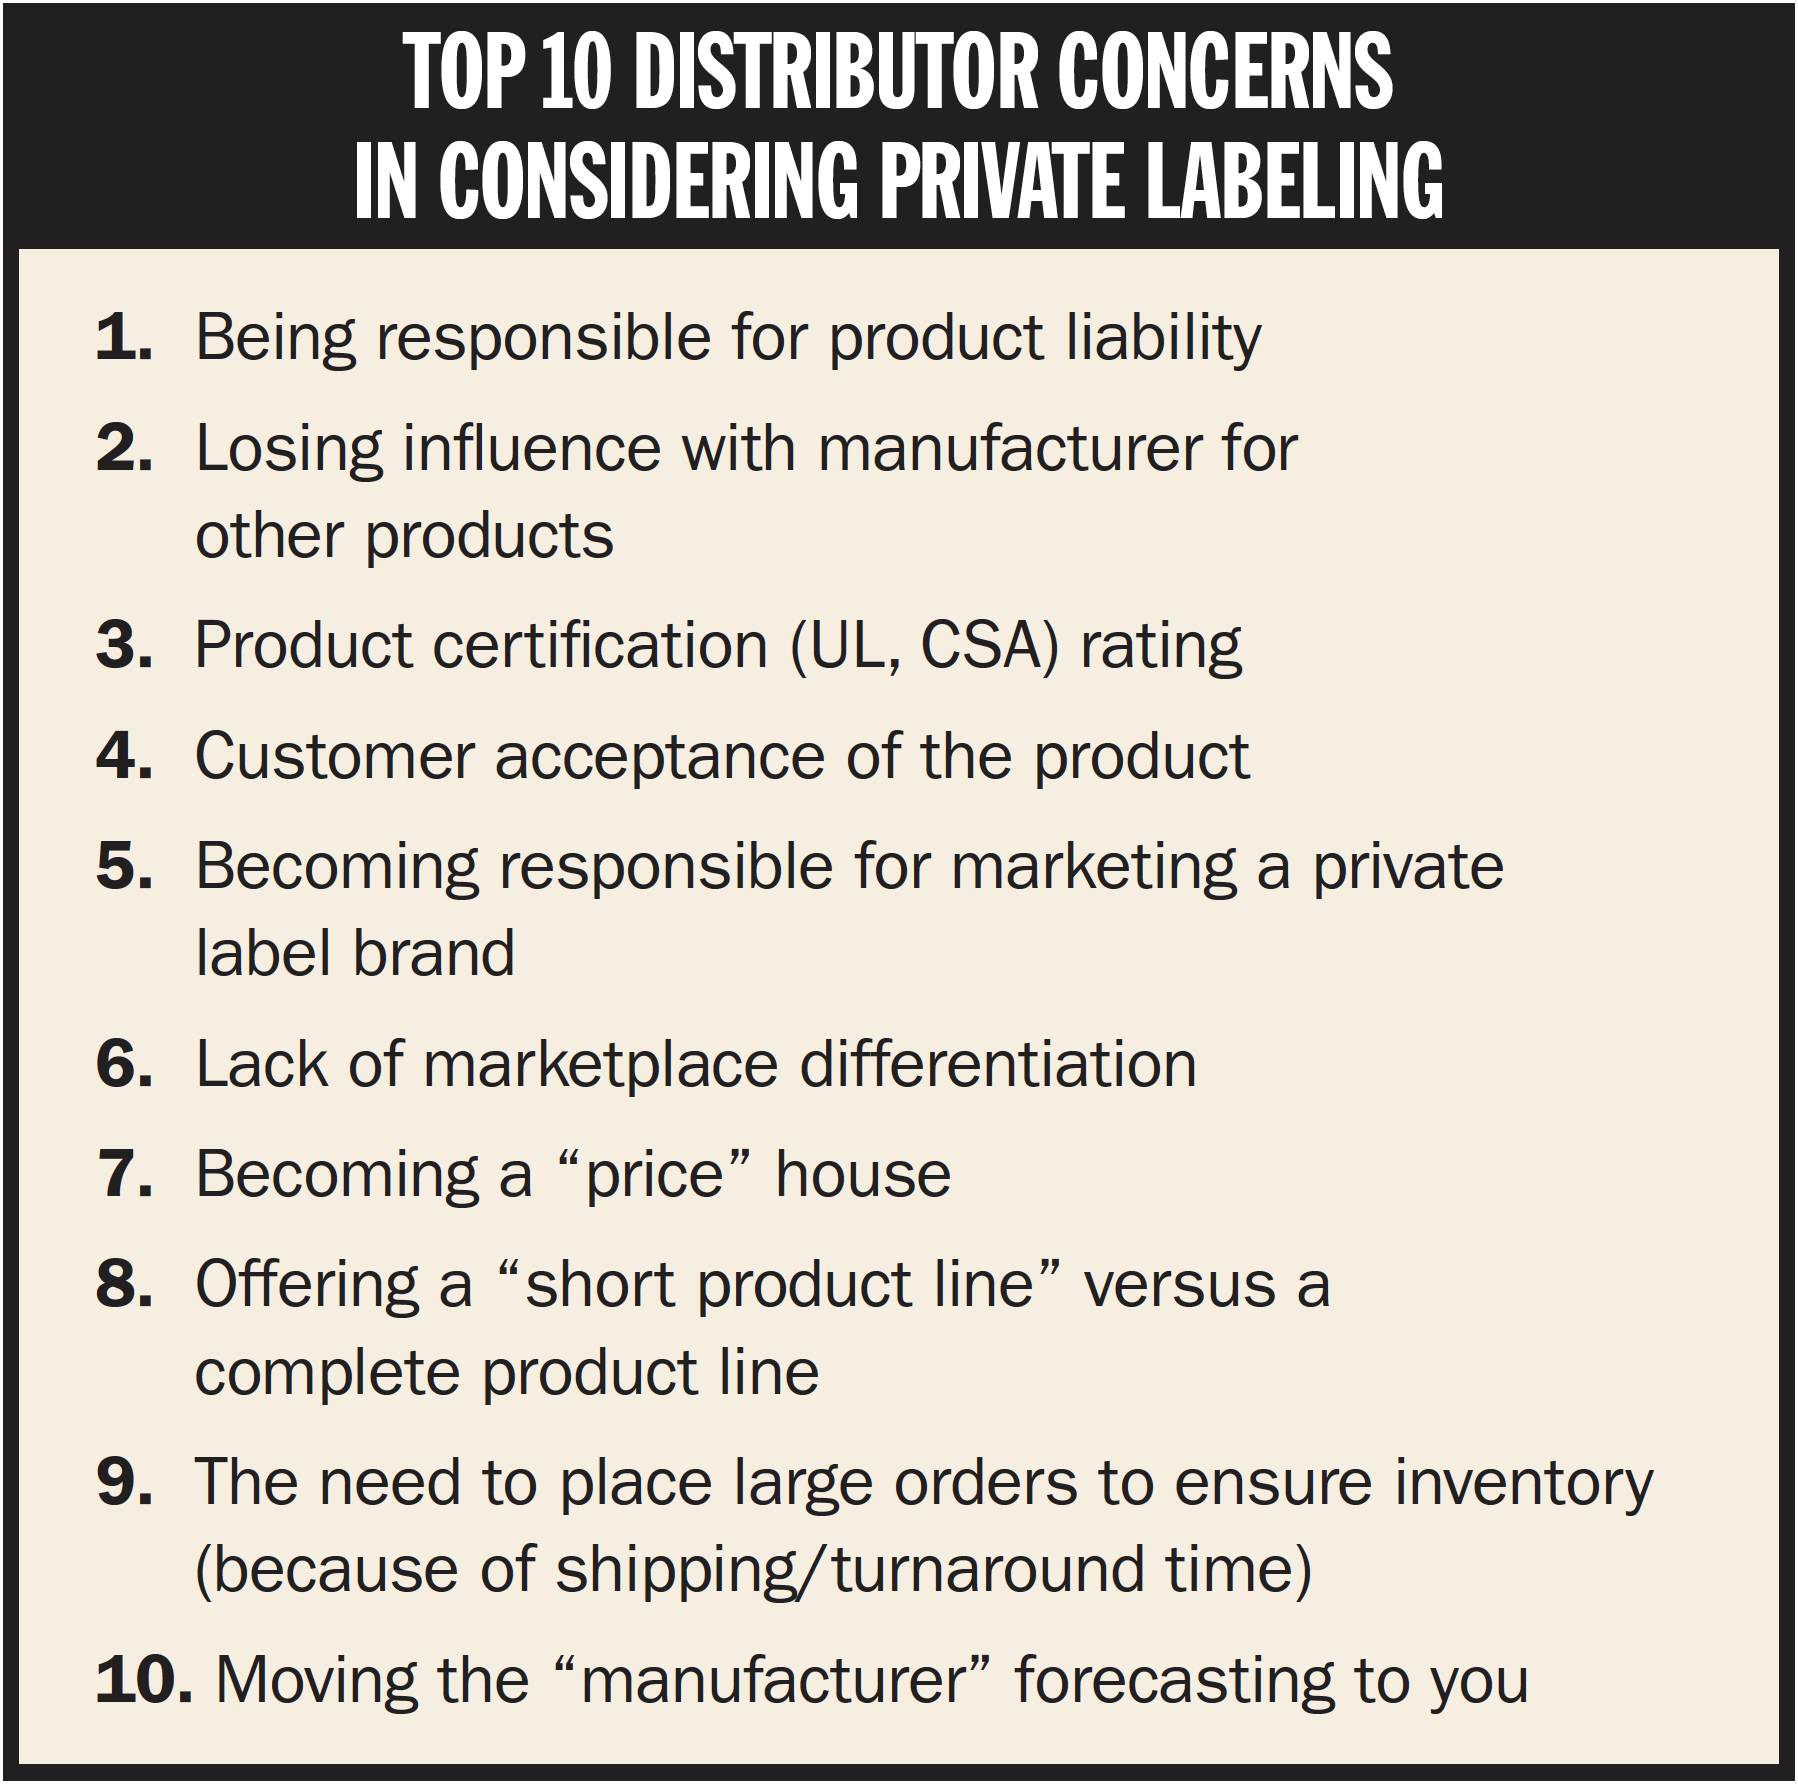 Top 10 Distributor Concerns in Considering Private Labeling